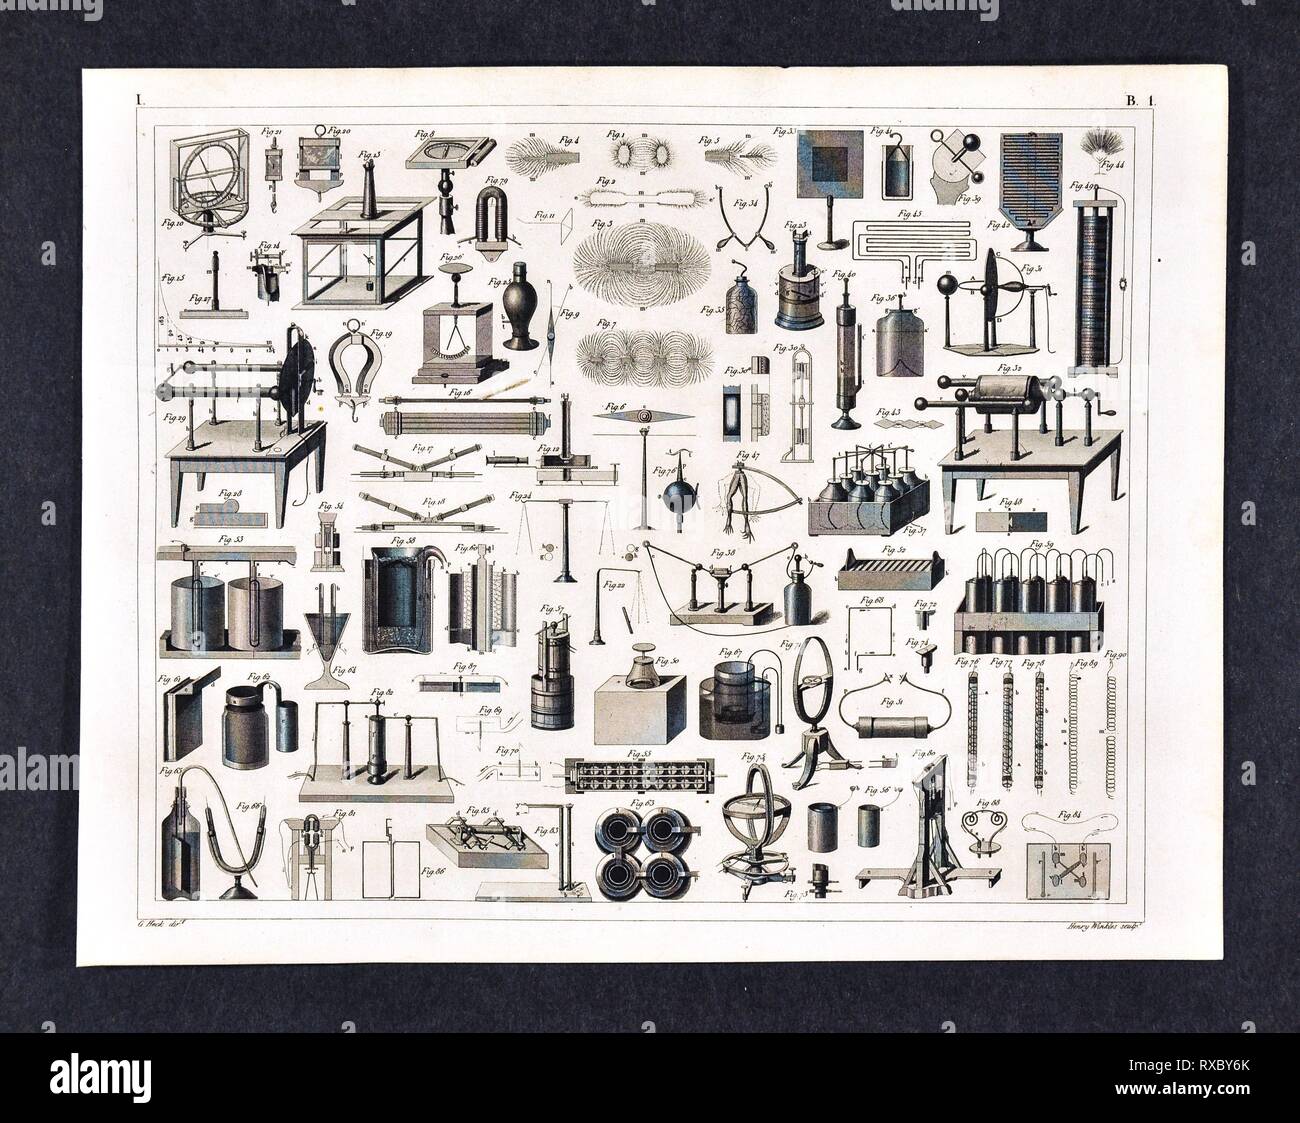 1849 Bilder Atlas Map Print of Laboratory Equipment for Magnetic and Electrical Science Experiments Stock Photo